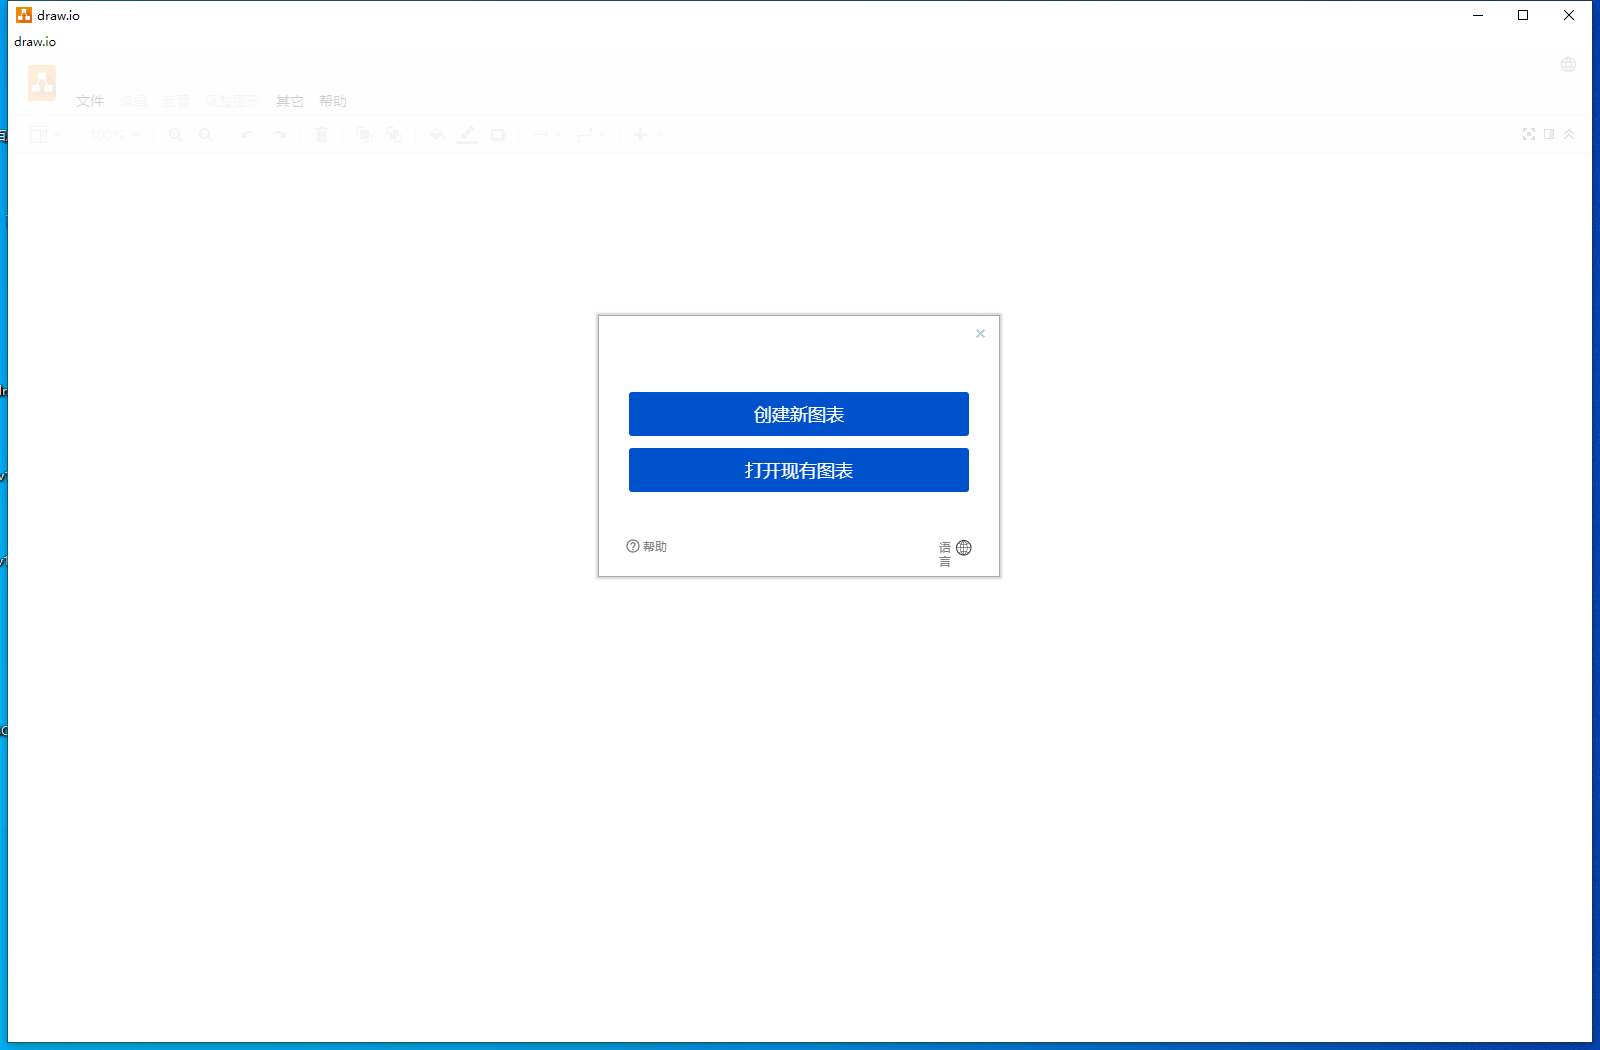 download the new for windows Draw.io 21.5.1